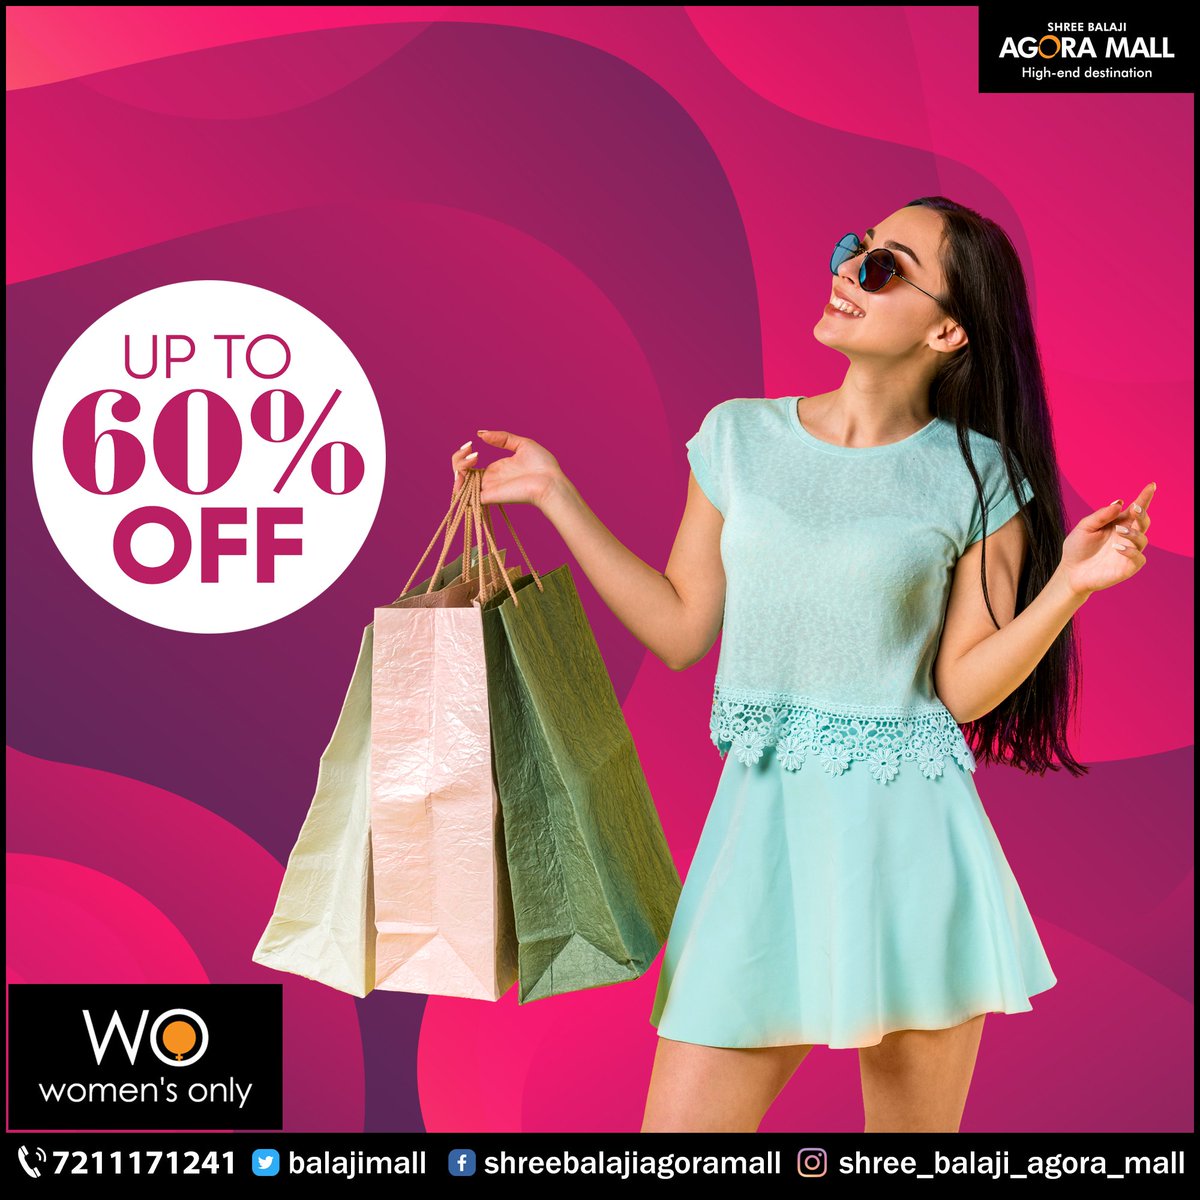 “Don’t stress about the dress , we’ll dress you to impress” Dress Smart with “Women’s Only” , Agora Mall  #Endofseasonsale & Get UPTO60% OFF on your favourite brands.
For More Details Contact:-7211171241
Visit:-bit.ly/2GEEpJJ
#gandhinagar #ahmedabad #brands #monsoonoffer